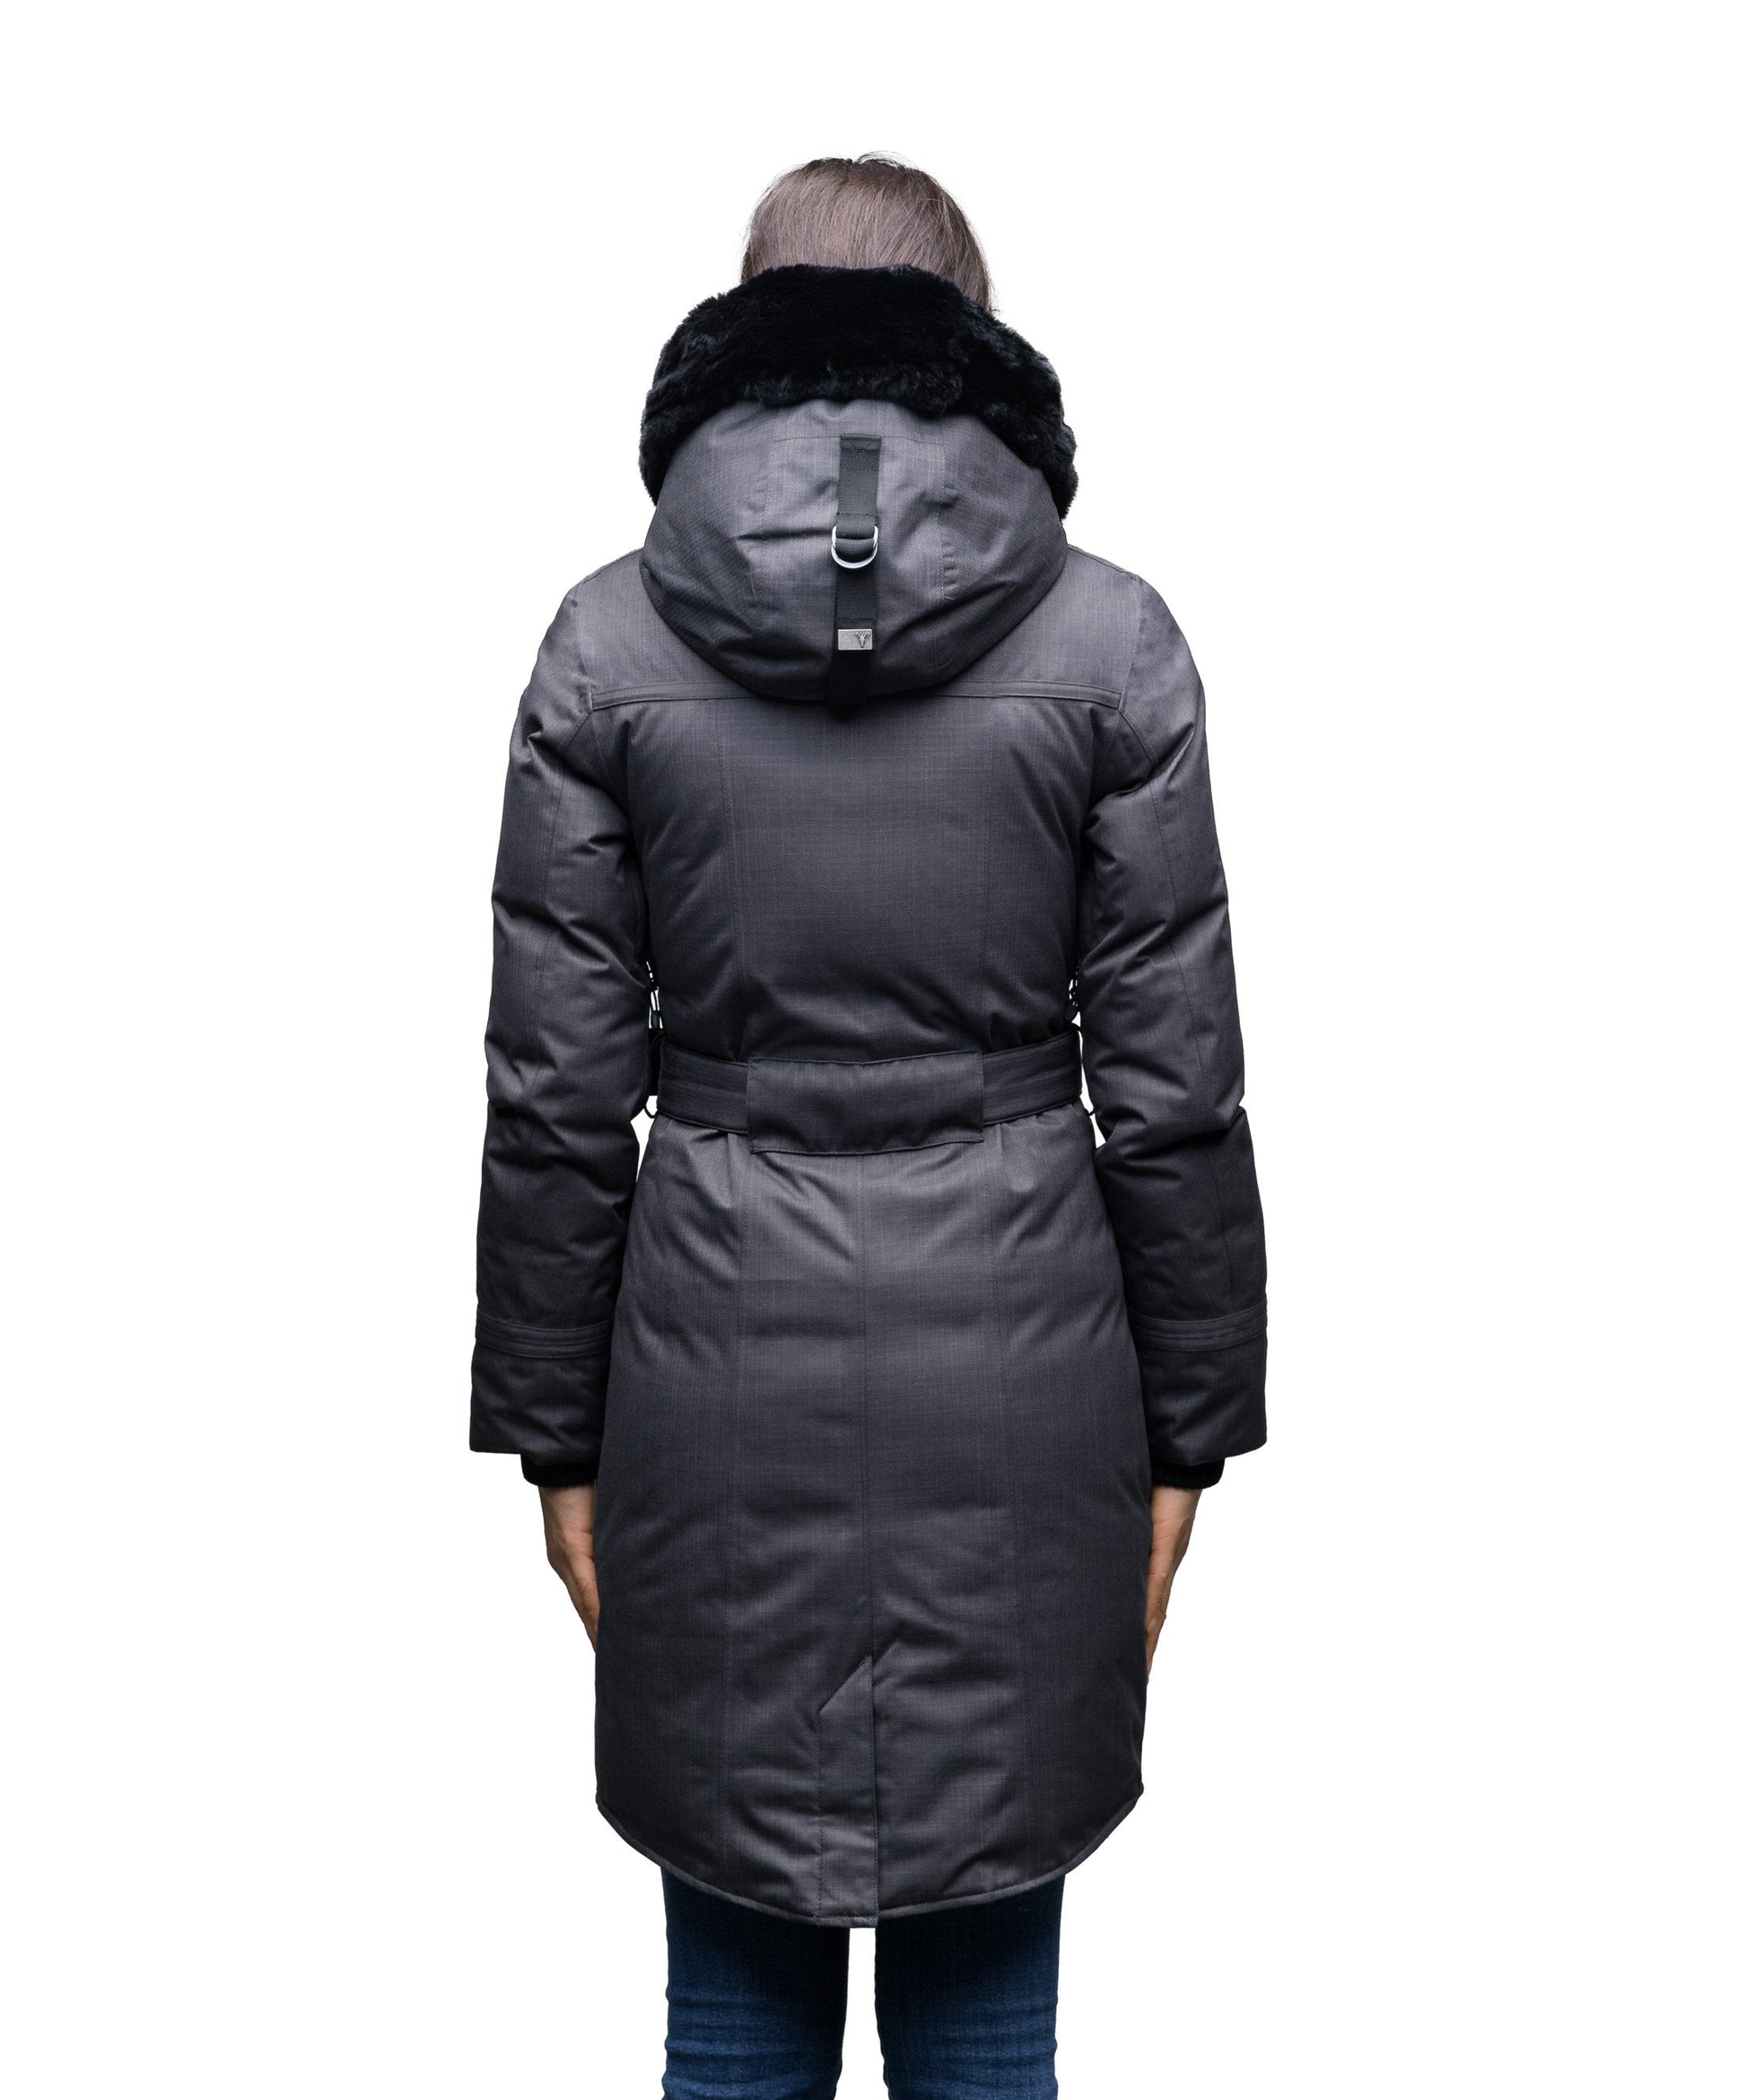 Women's down filled calf length parka with belted waist, and removable Rex Rabbit fur collar in CH Steel Grey